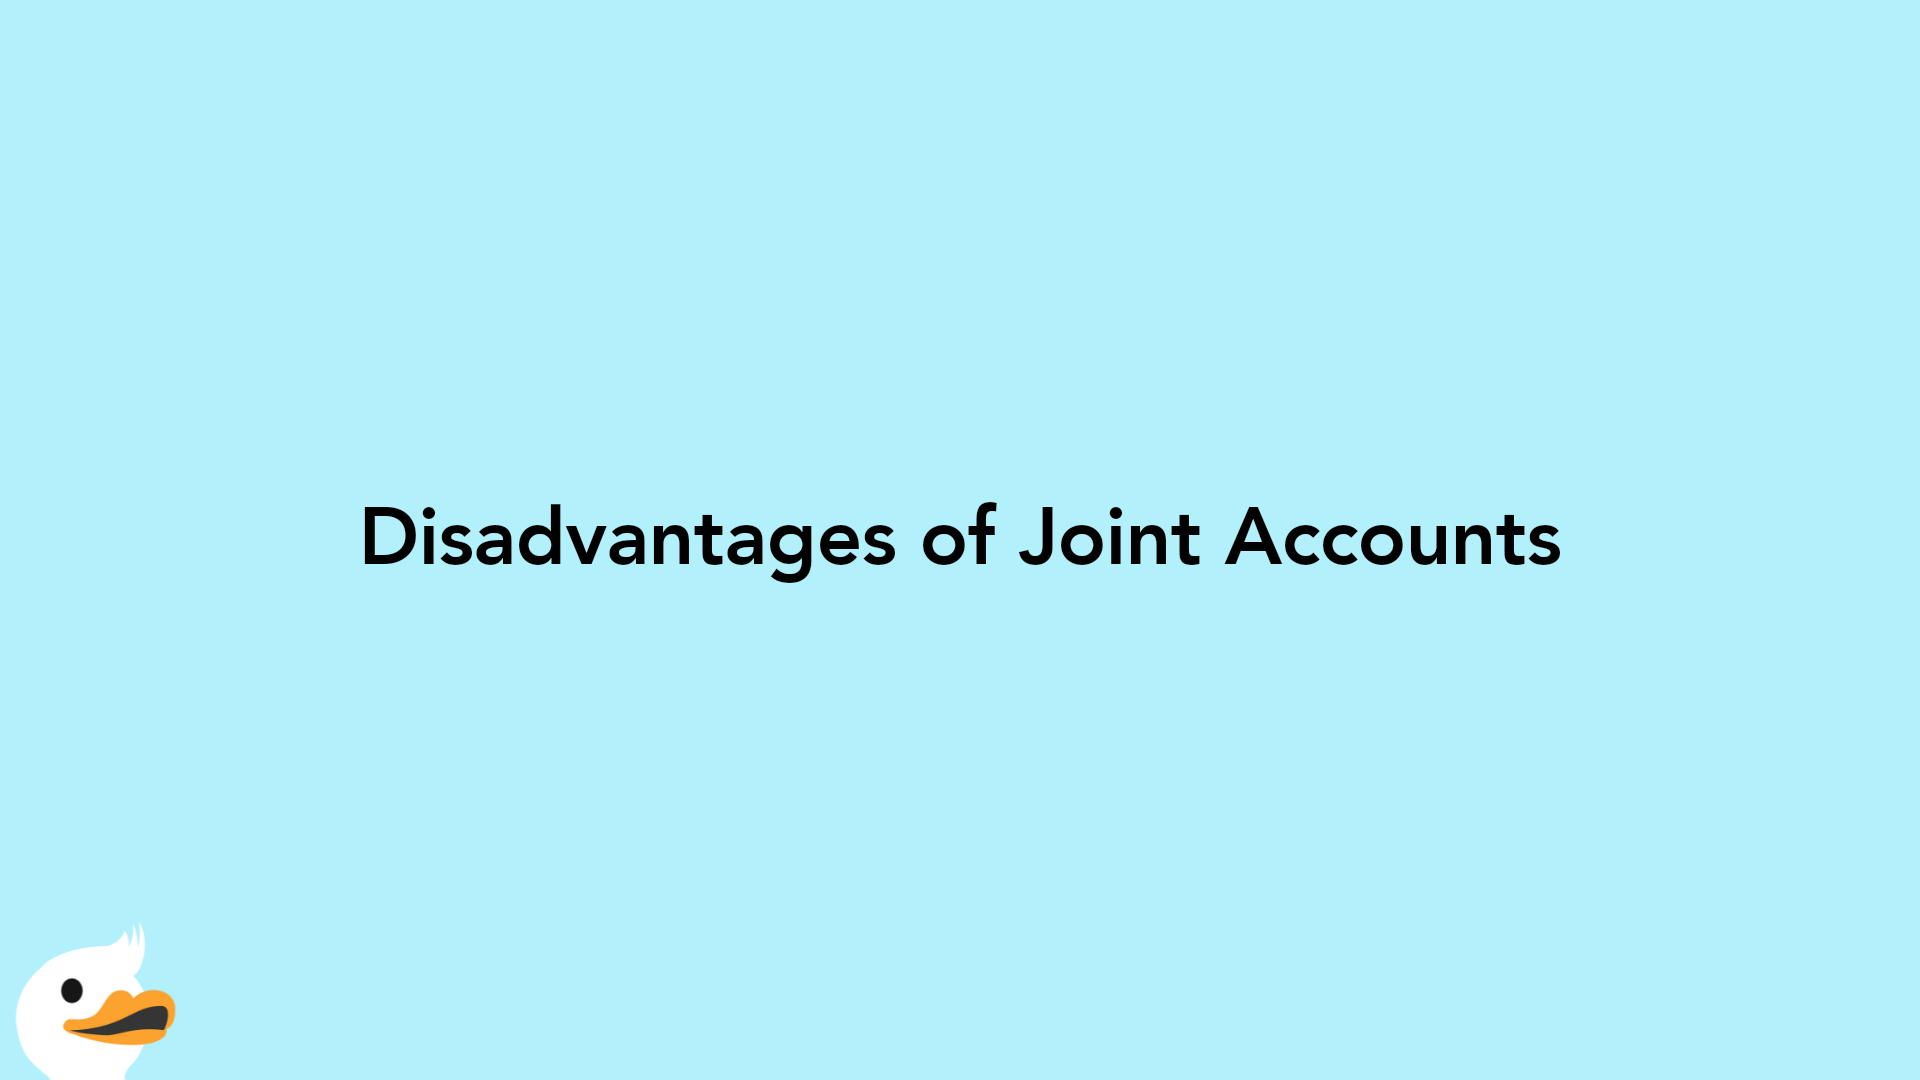 Disadvantages of Joint Accounts